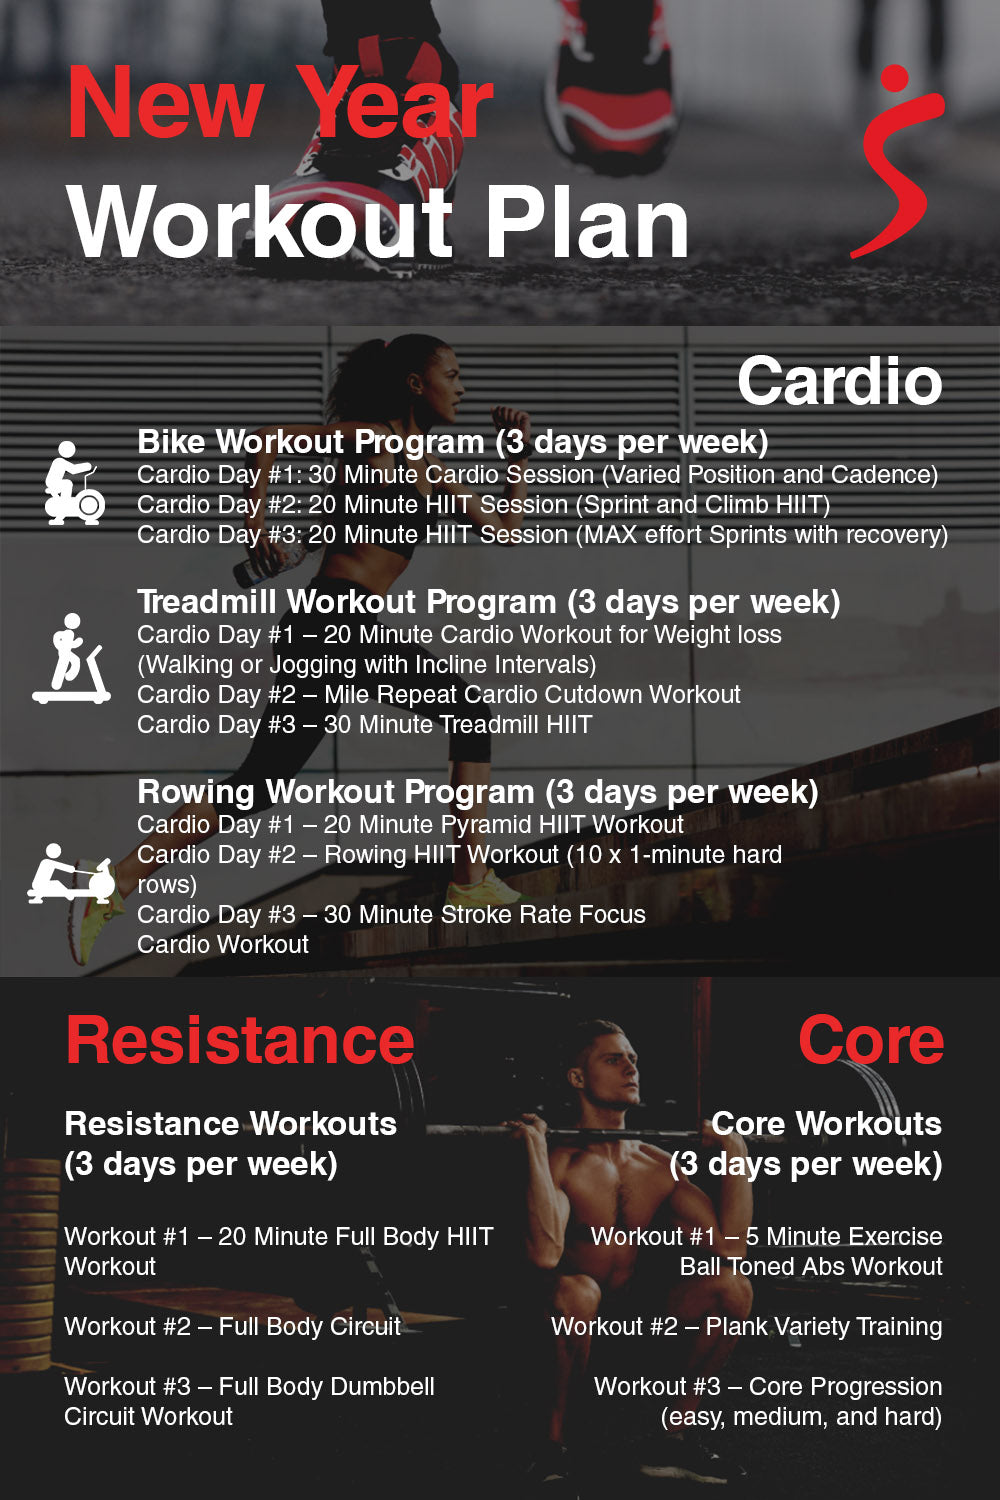 new year workout plan summary infographic